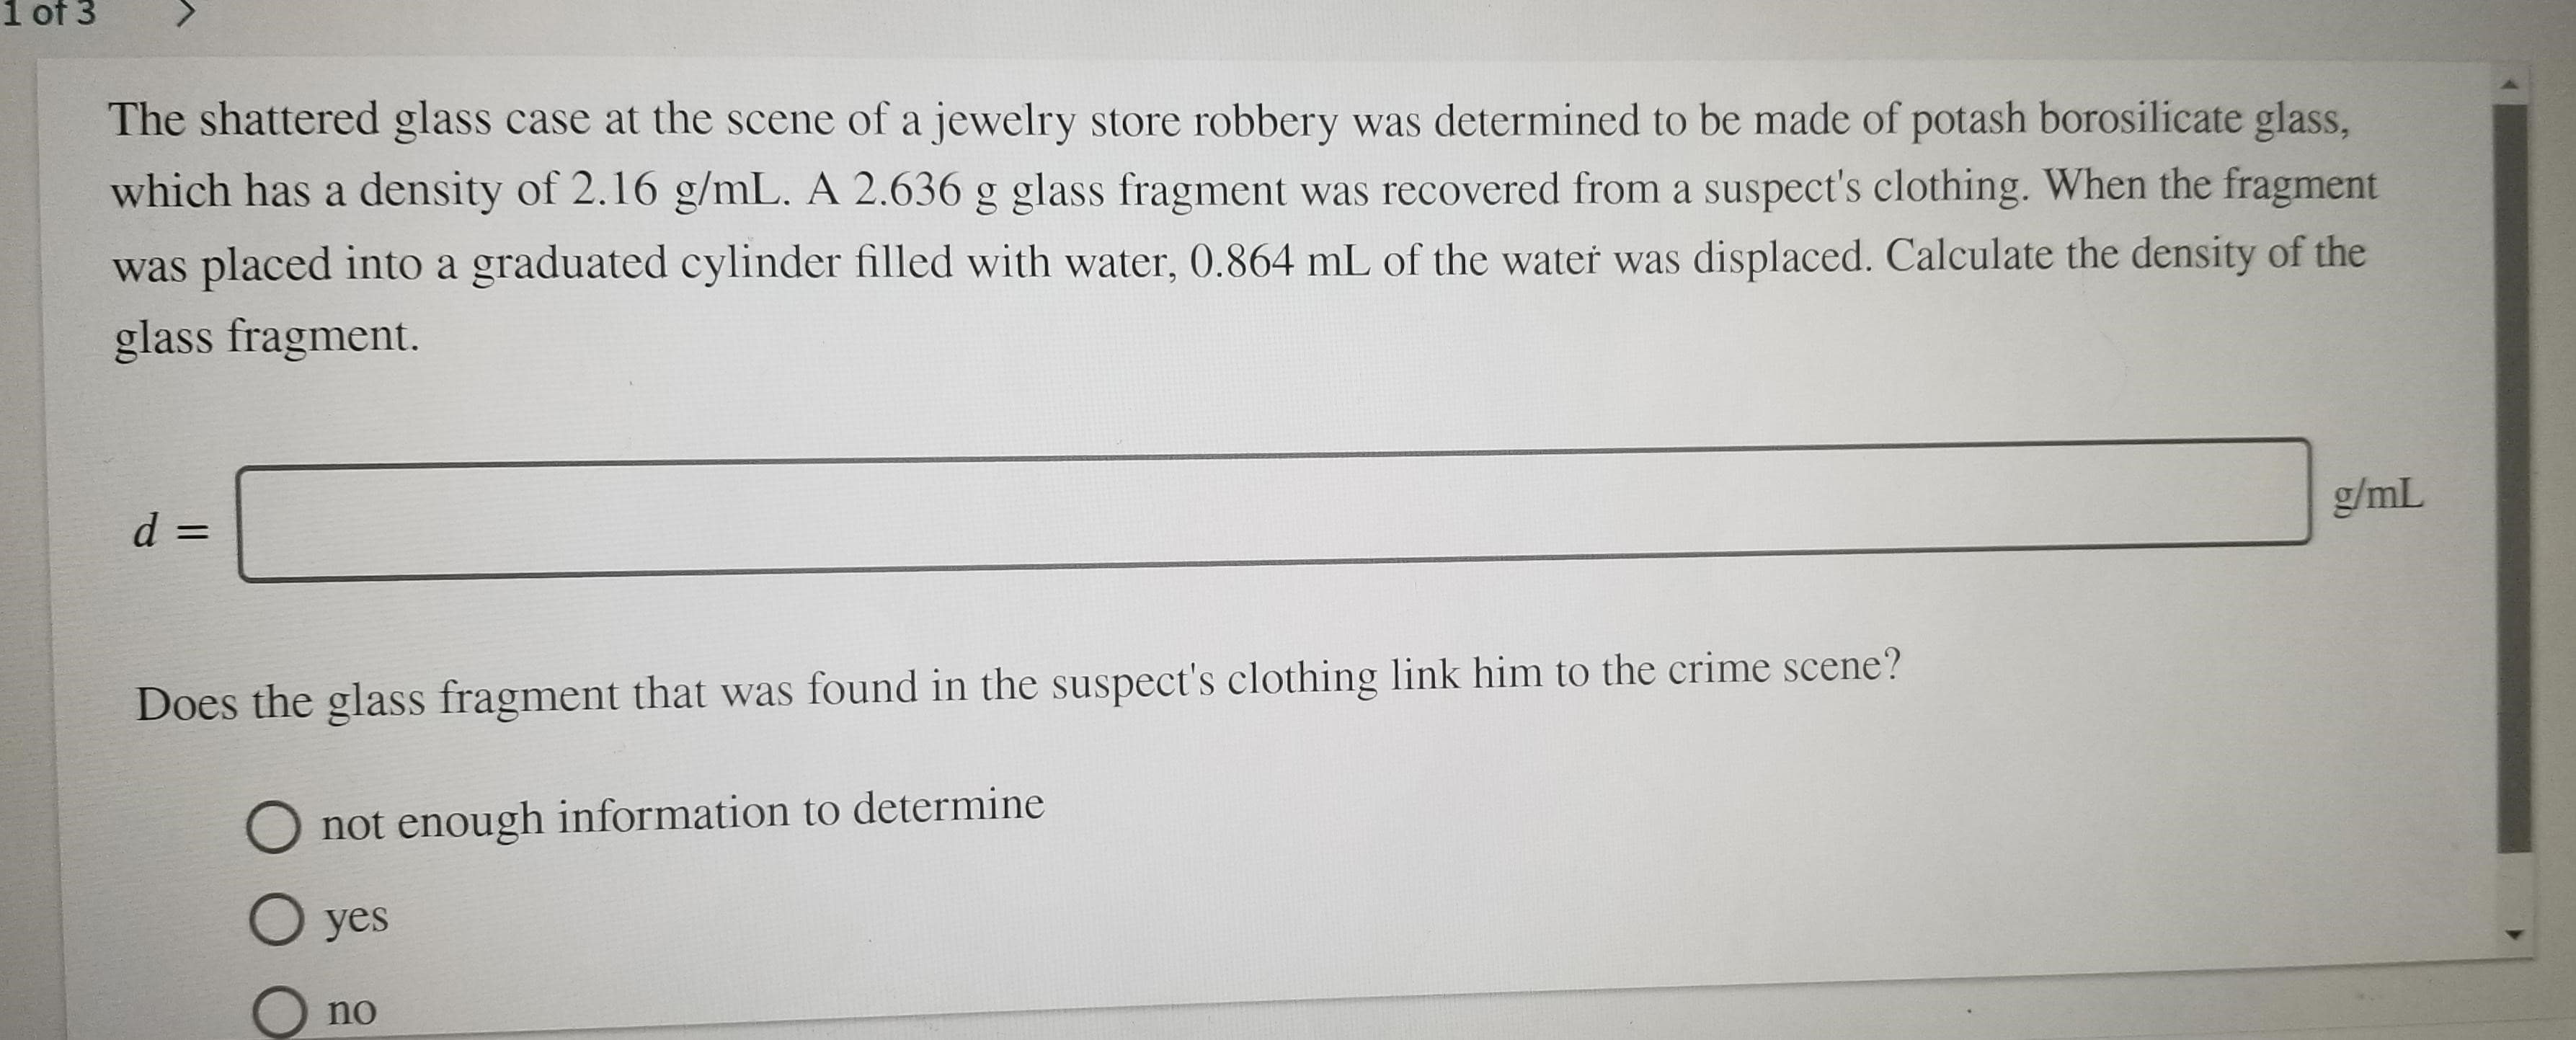 1 of 3
The shattered glass case at the scene of a jewelry store robbery was determined to be made of potash borosilicate glass,
which has a density of 2.16 g/mL. A 2.636 g glass fragment was recovered from a suspect's clothing. When the fragment
placed into a graduated cylinder filled with water, 0.864 mL of the water was displaced. Calculate the density of the
was
glass fragment.
g/mL
d =
Does the glass fragment that was found in the suspect's clothing link him to the crime scene?
not enough information to determine
O yes
no
